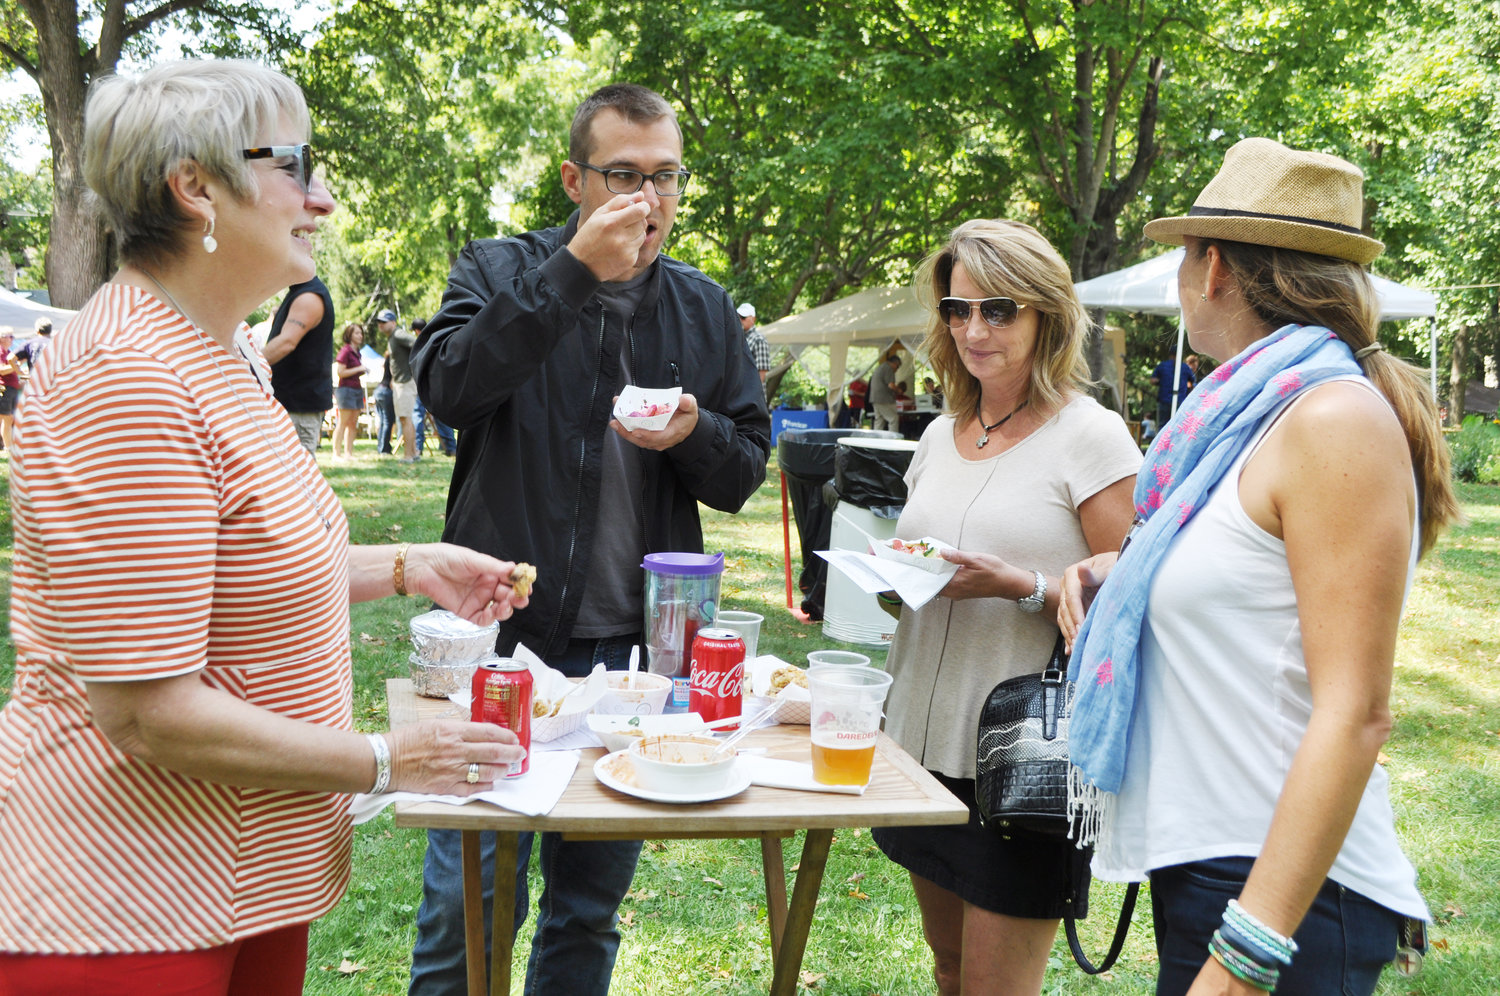 Rees Olander, left, visits with family members Emerson Olander, Sara Olander and Megal Olander at the 2020 Taste of Montgomery County on the grounds of the General Lew Wallace Study & Museum.